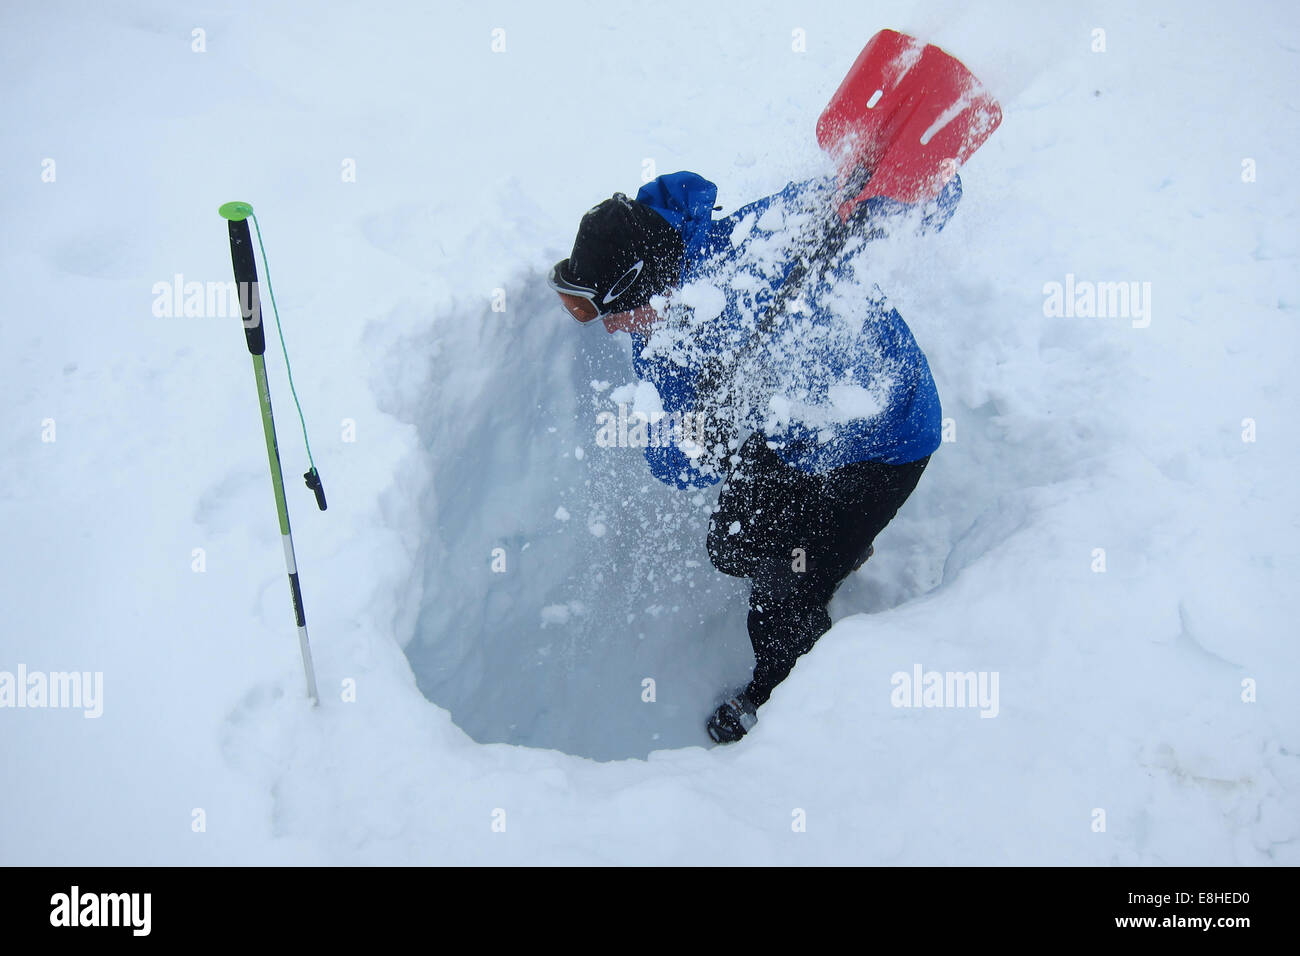 Man digging his way towards victim marked by a snow probe. Avalanche rescue training. Stock Photo